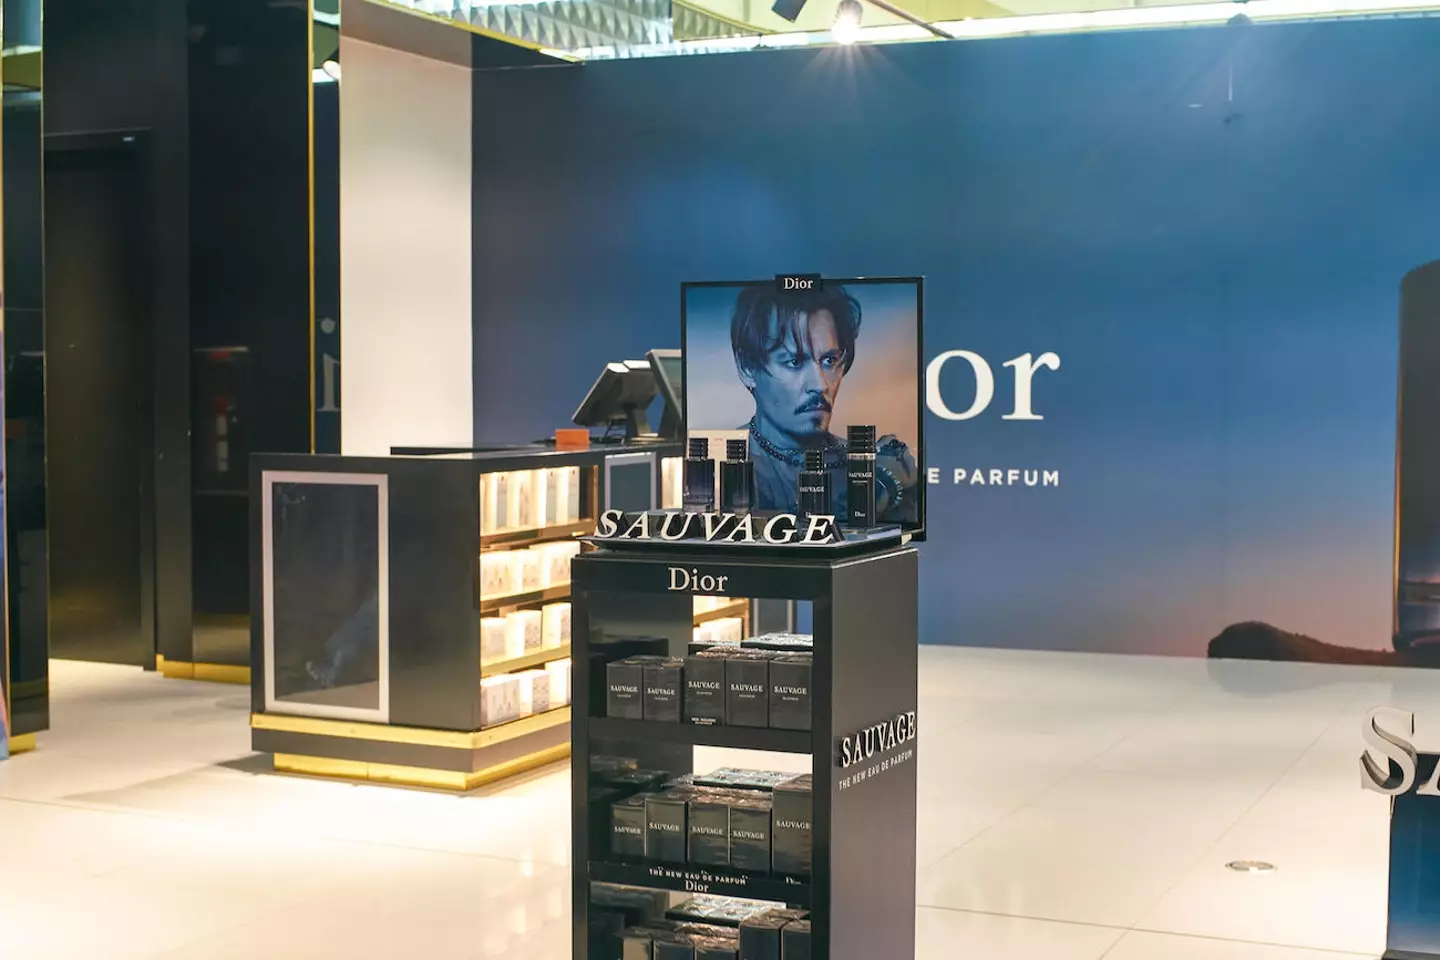 Depp partnered up with Dior back in 2015 and the 'Sauvage' fragrance was reportedly said to be the best-selling men's cologne on websites such as Sephora and Ulta's, according to the Wall Street Journal in June.